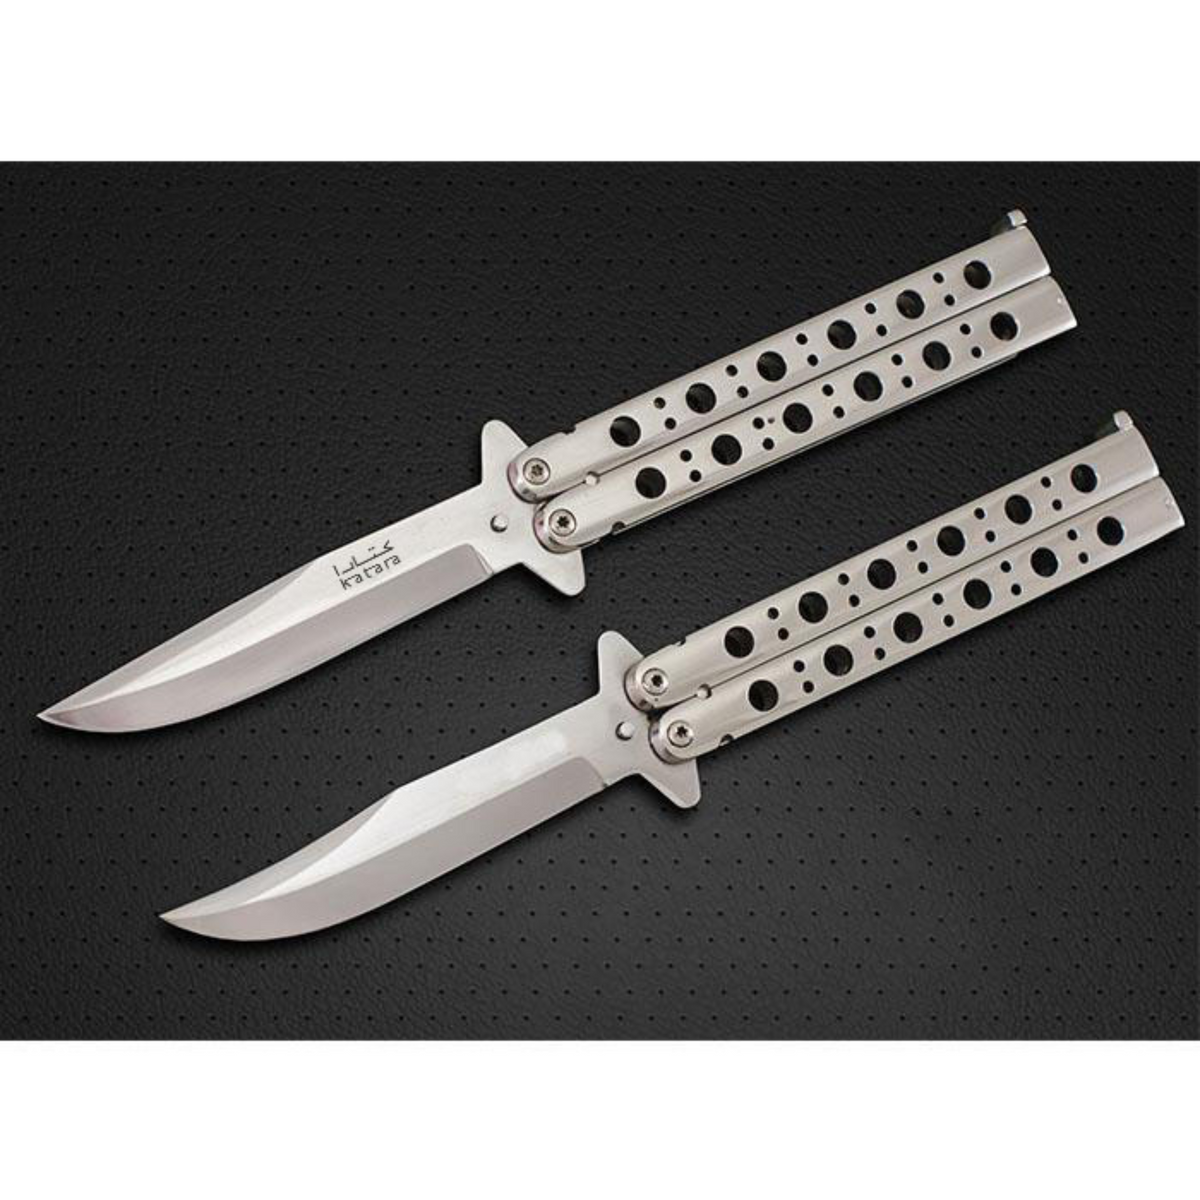 Silver-spotted 12cm?Blade High Carbon Filipino Balisongs butterfly Knife